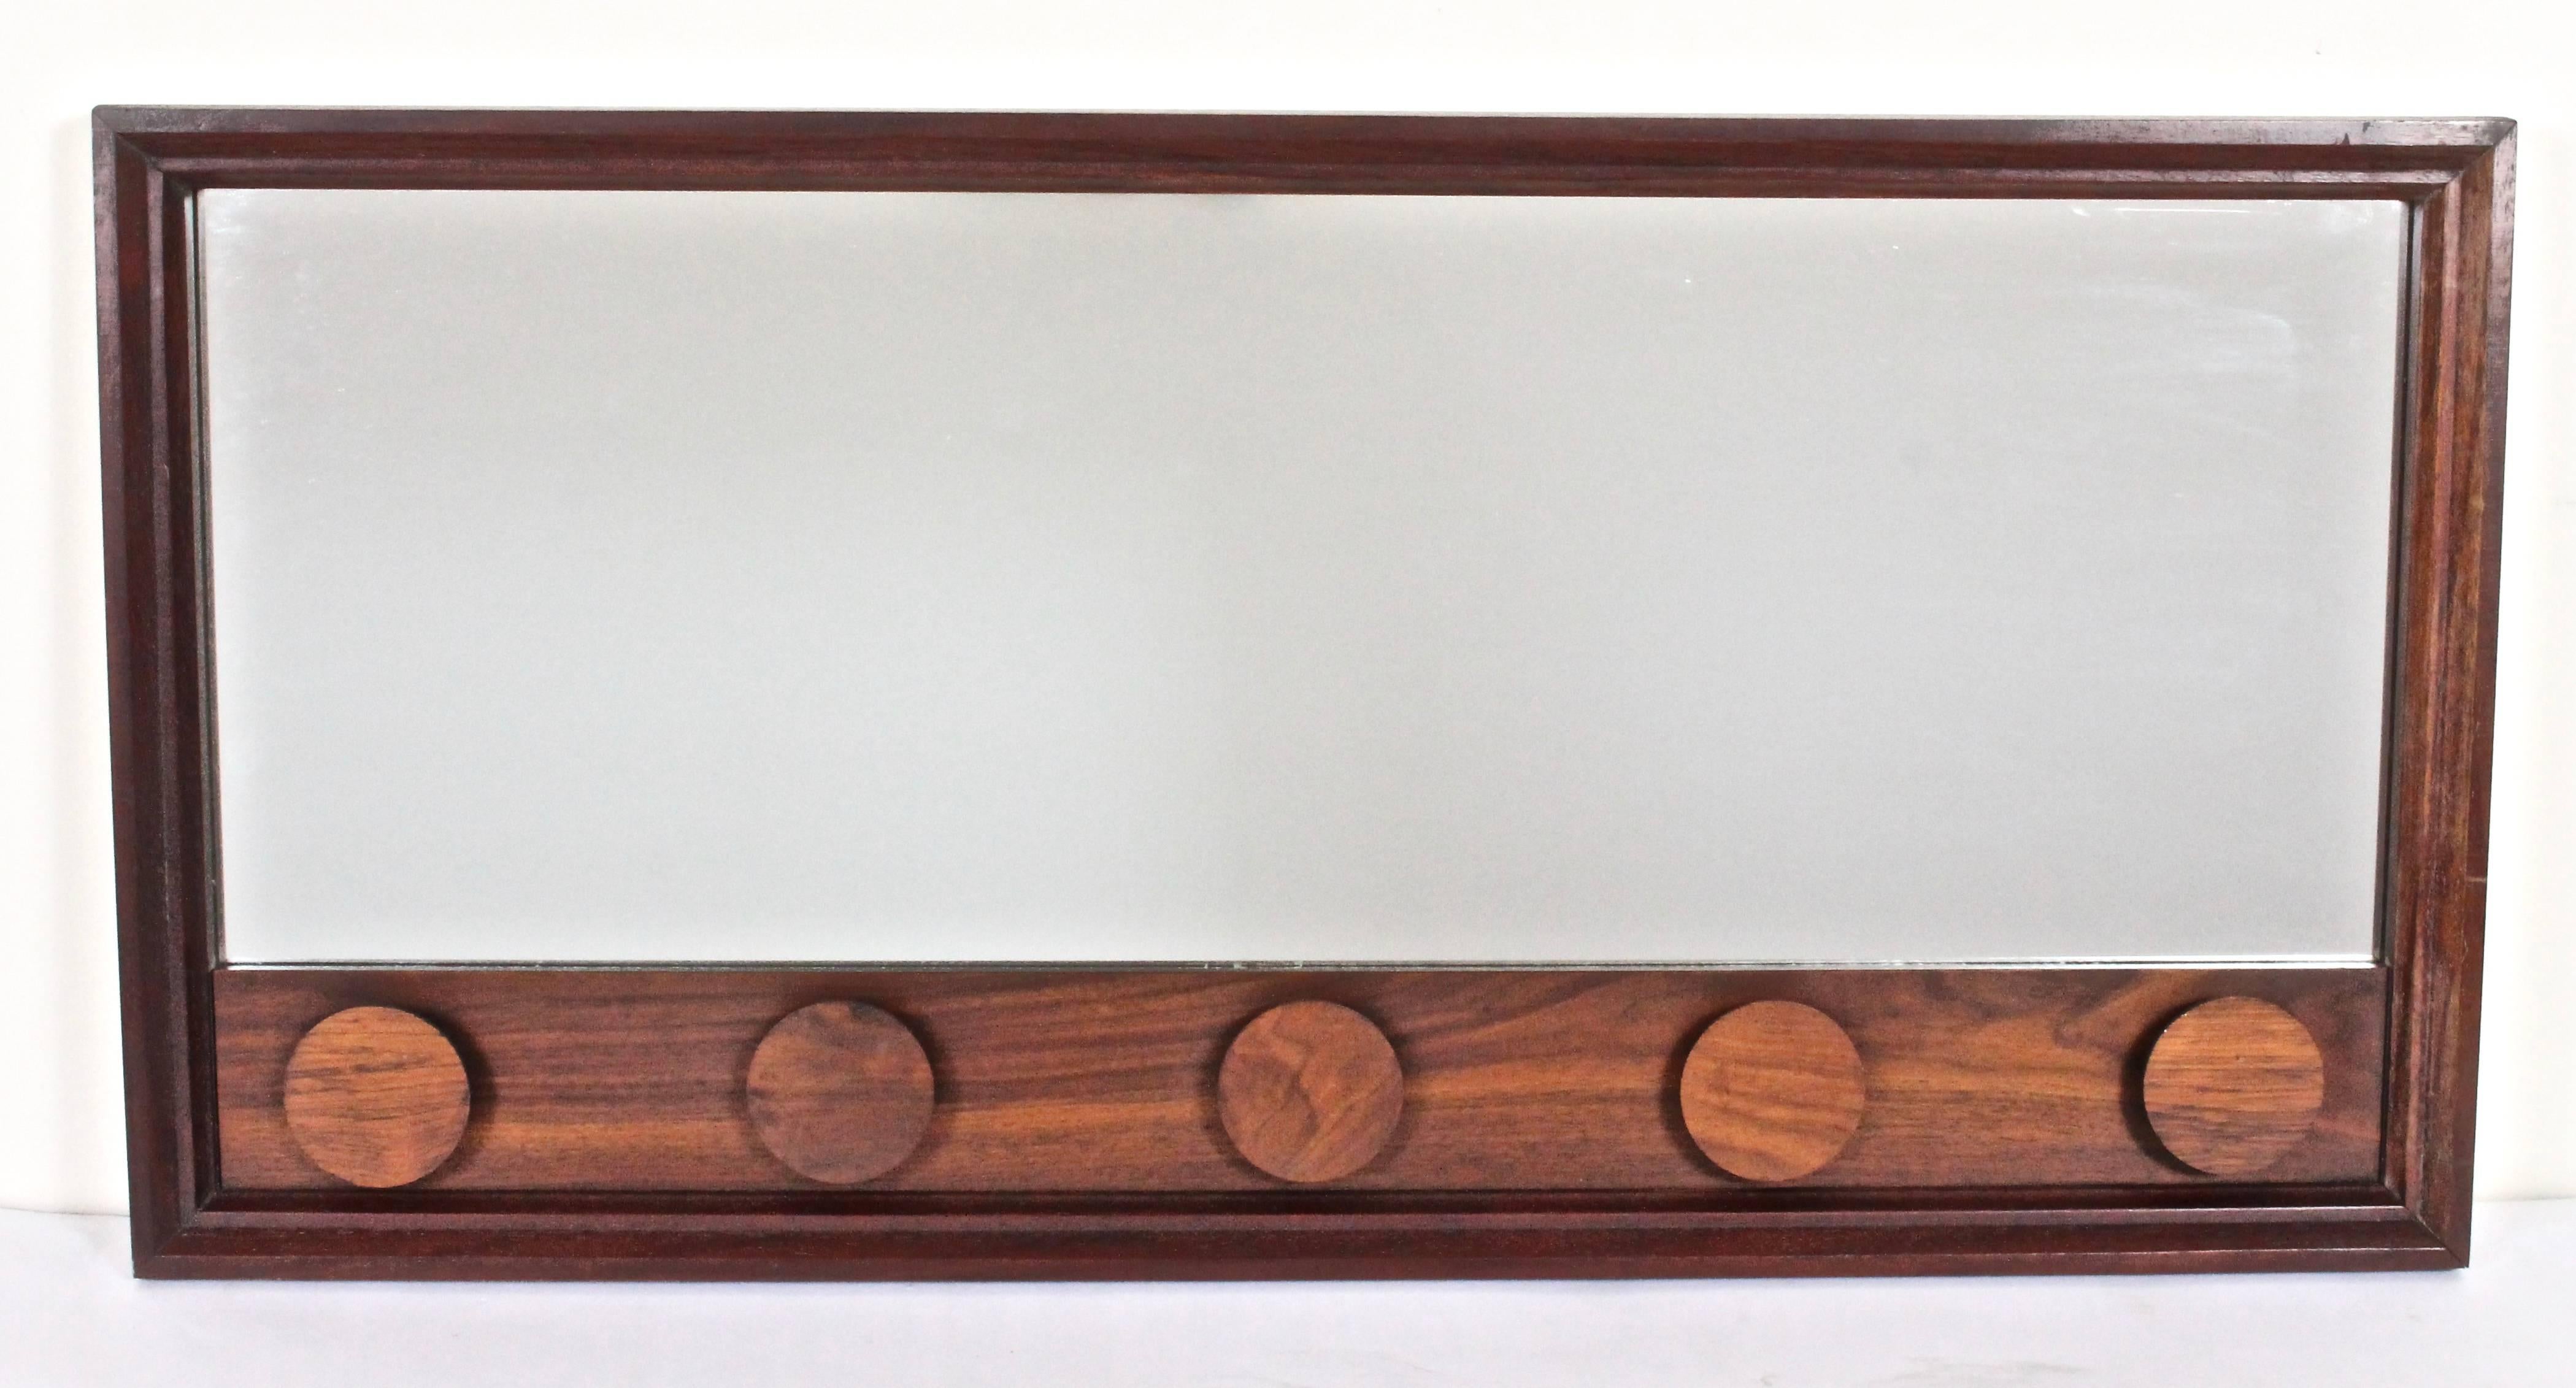 Danish Mid-Century Modern Rosewood Framed Beveled Mirror with round Rosewood disc detail.  Featuring rectangular solid beveled Rosewood frame, beveled mirror with five raised round appliques suitable for hanging objects. Jewelry. Necklaces. Belts.